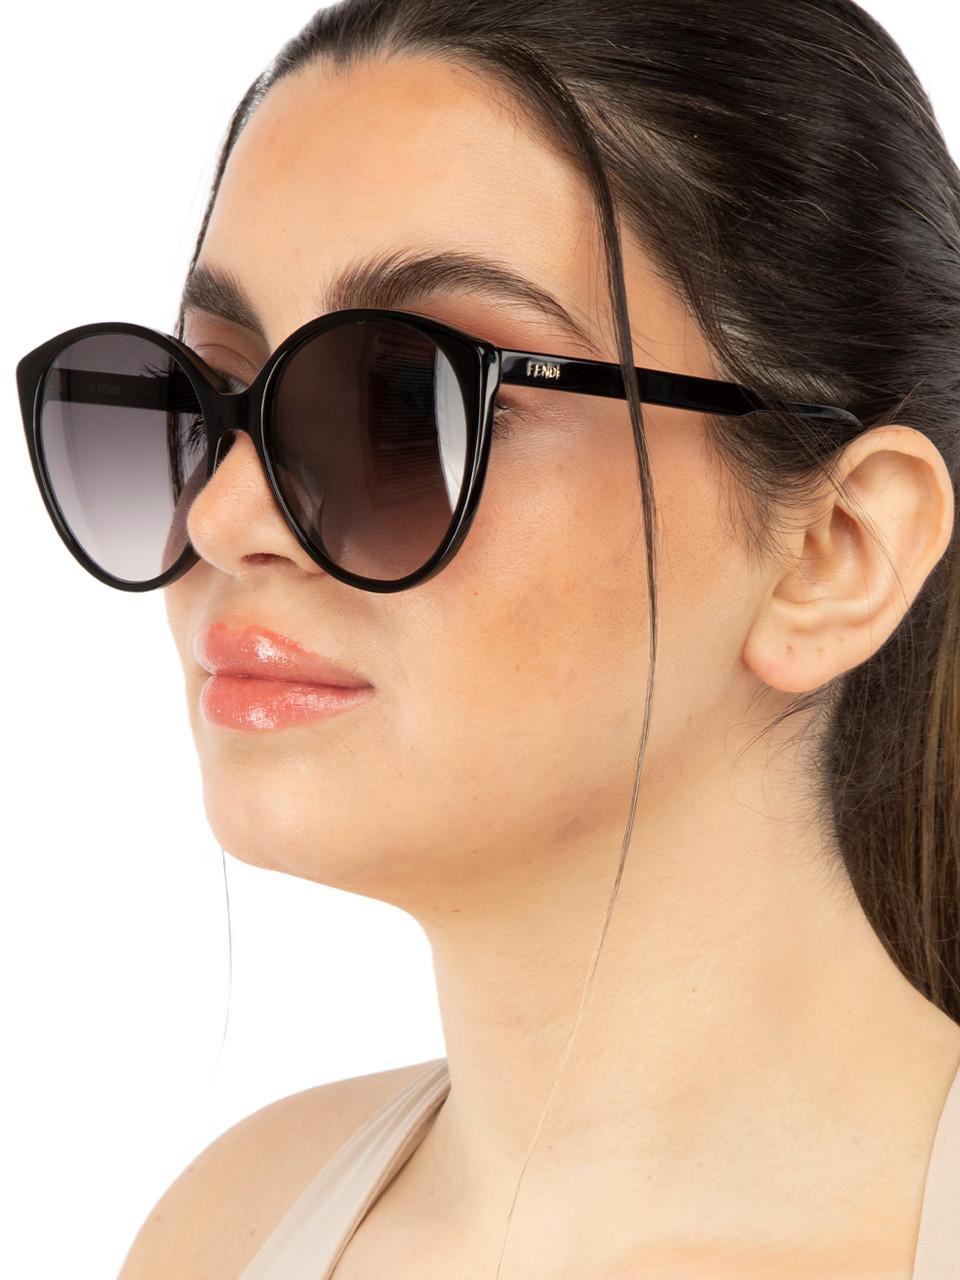 CONDITIONisNew with tags on this brand new Fendi designer item. This item comes with original packaging.
 
 
 
 Details
 
 
 Model: FE40029U
 
 Shiny Black
 
 Acetate
 
 Cat Eye Sunglasses
 
 Gradient Smoke Lens
 
 Full-Rim
 
 100% UV protection
 
